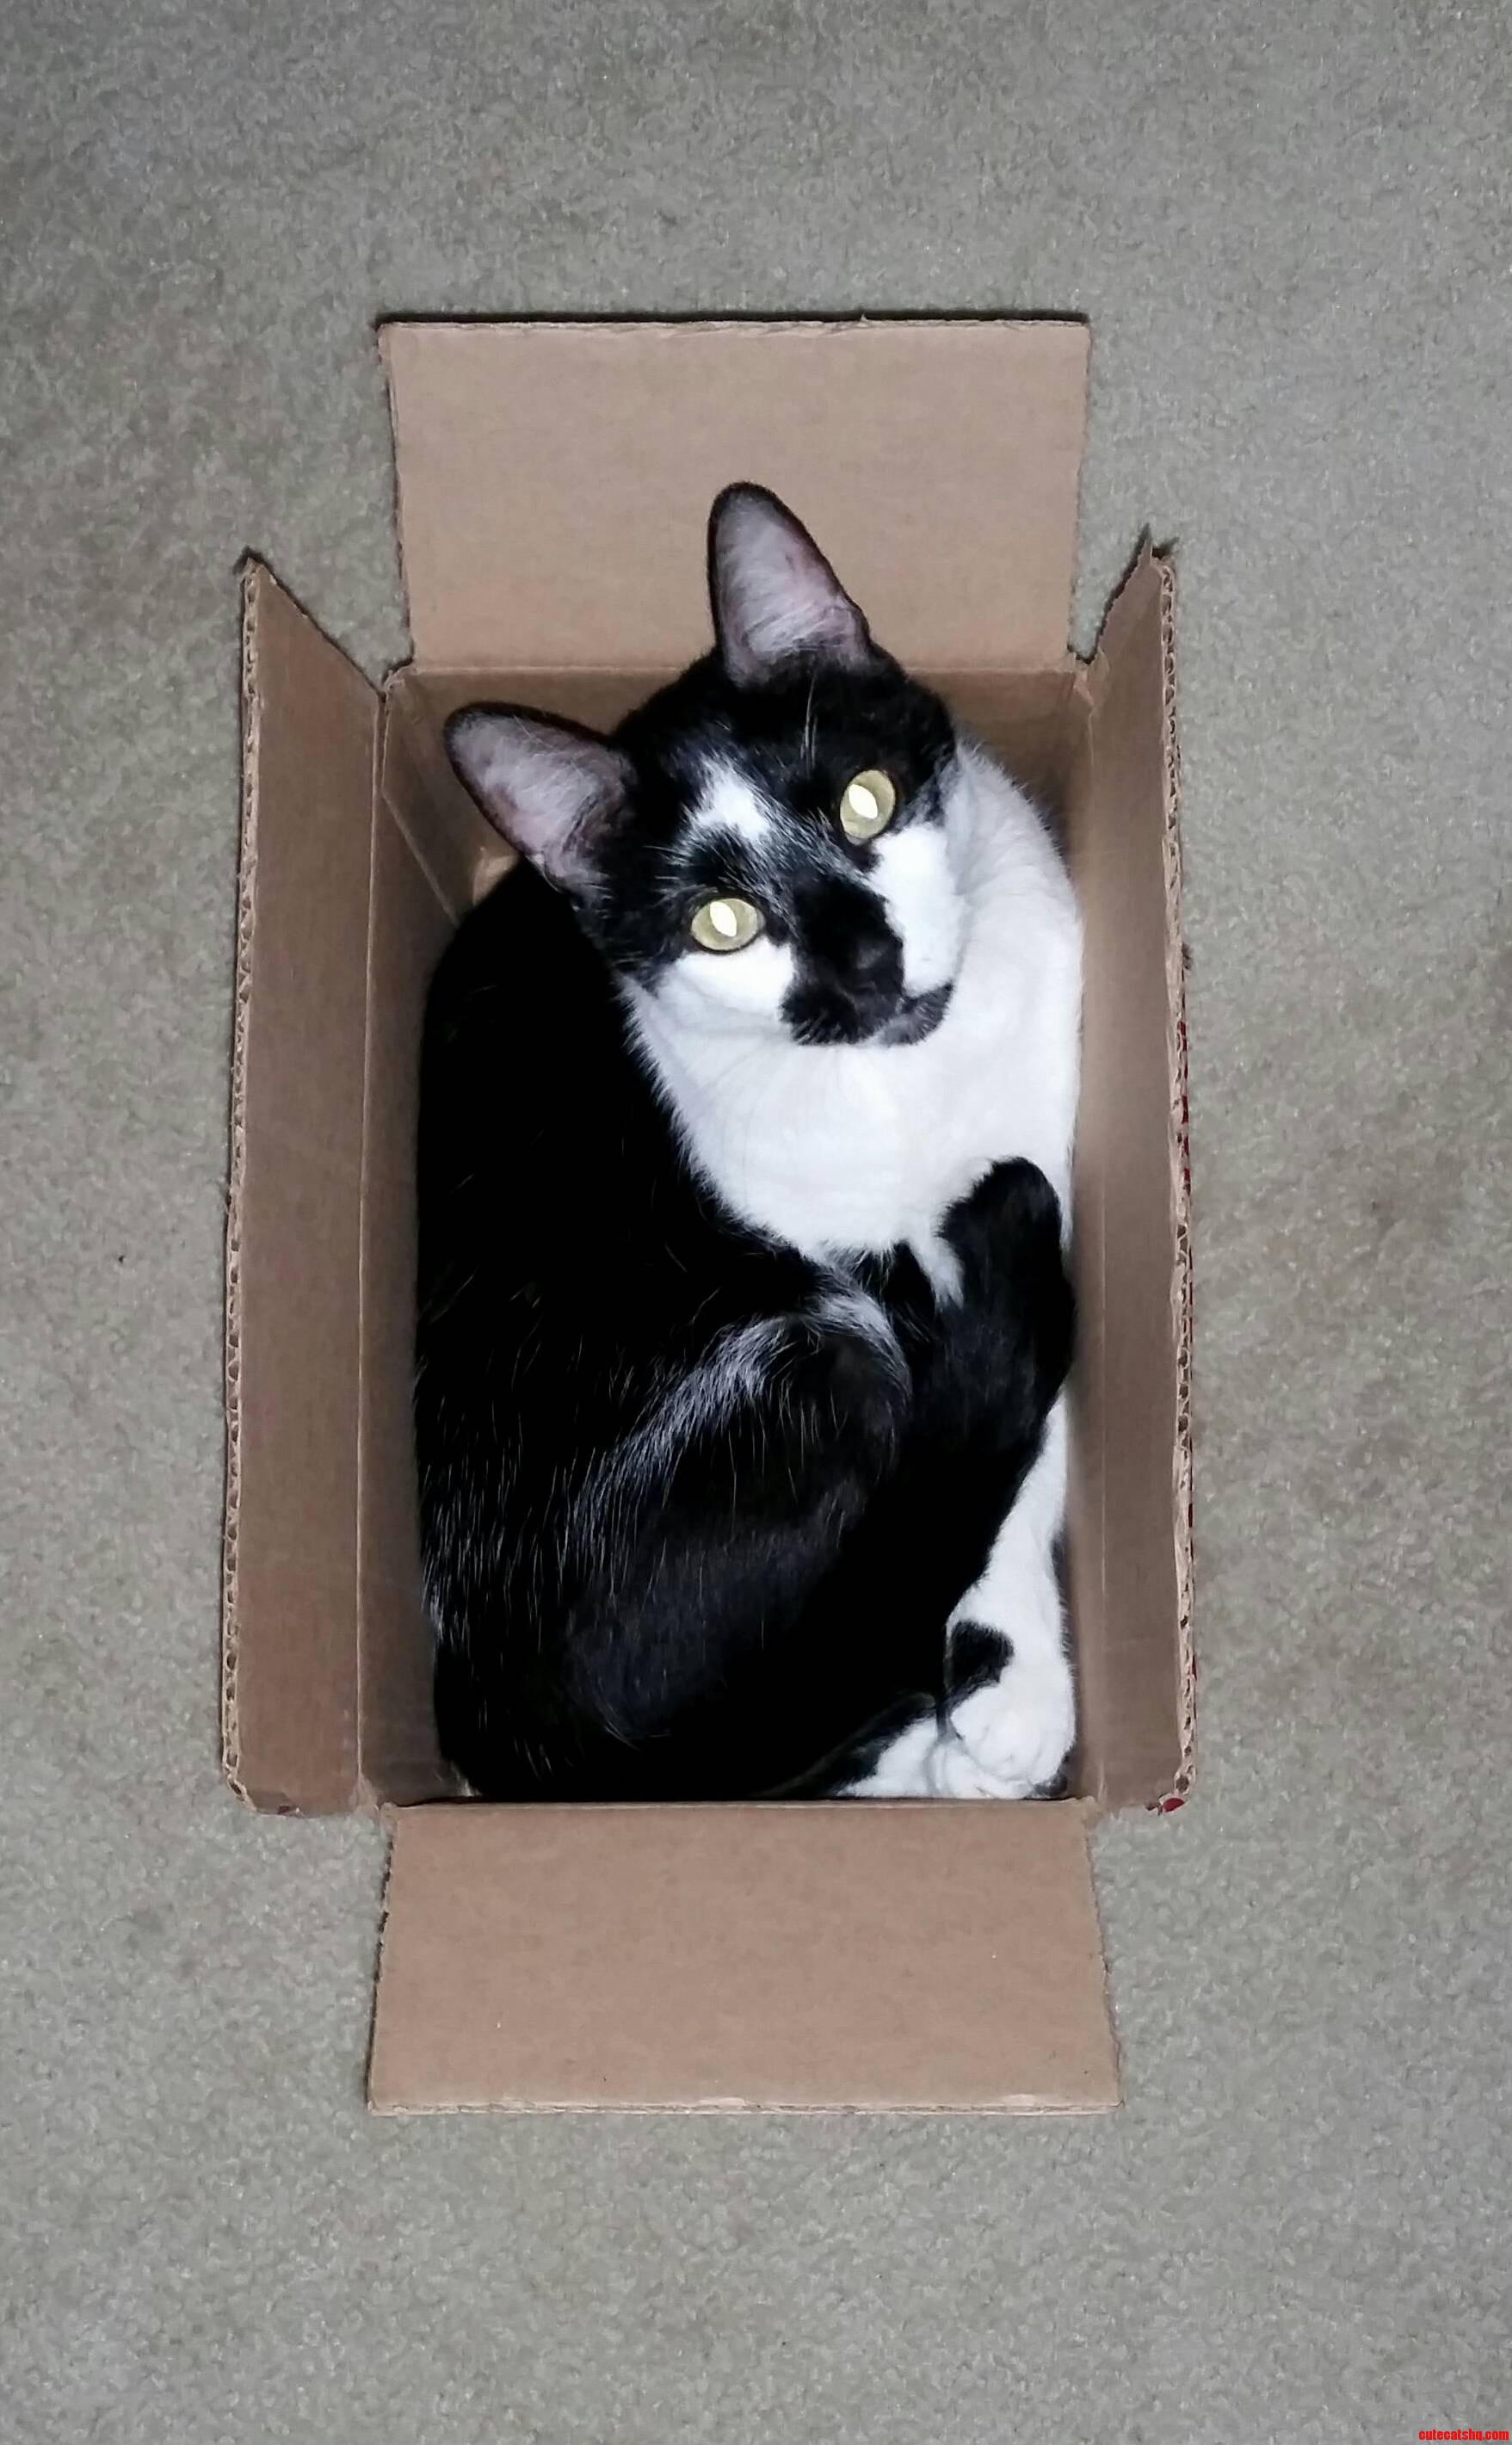 Say hello to kitty. if he fits he always sits.